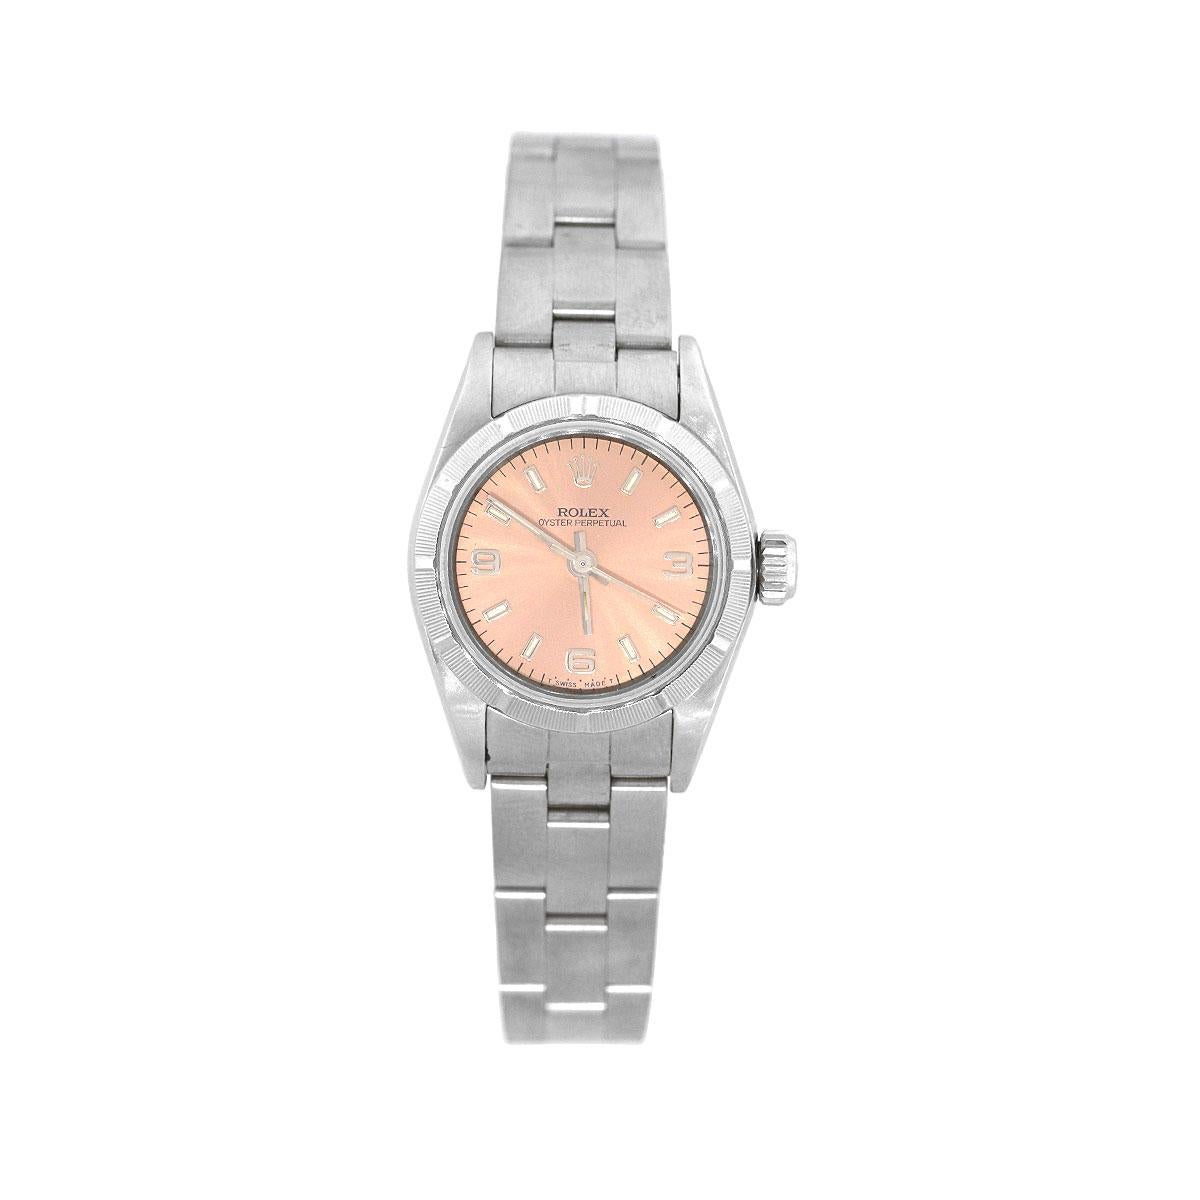 Brand: Rolex
MPN: 67230
Model: Oyster Perpetual
Case Material: Stainless Steel
Case Diameter: 24mm
Bezel:Stainless steel bezel
Dial: Salmon dial with both silver arabic and stick hour markers.
Bracelet: stainless steel oyster bracelet
Crystal: